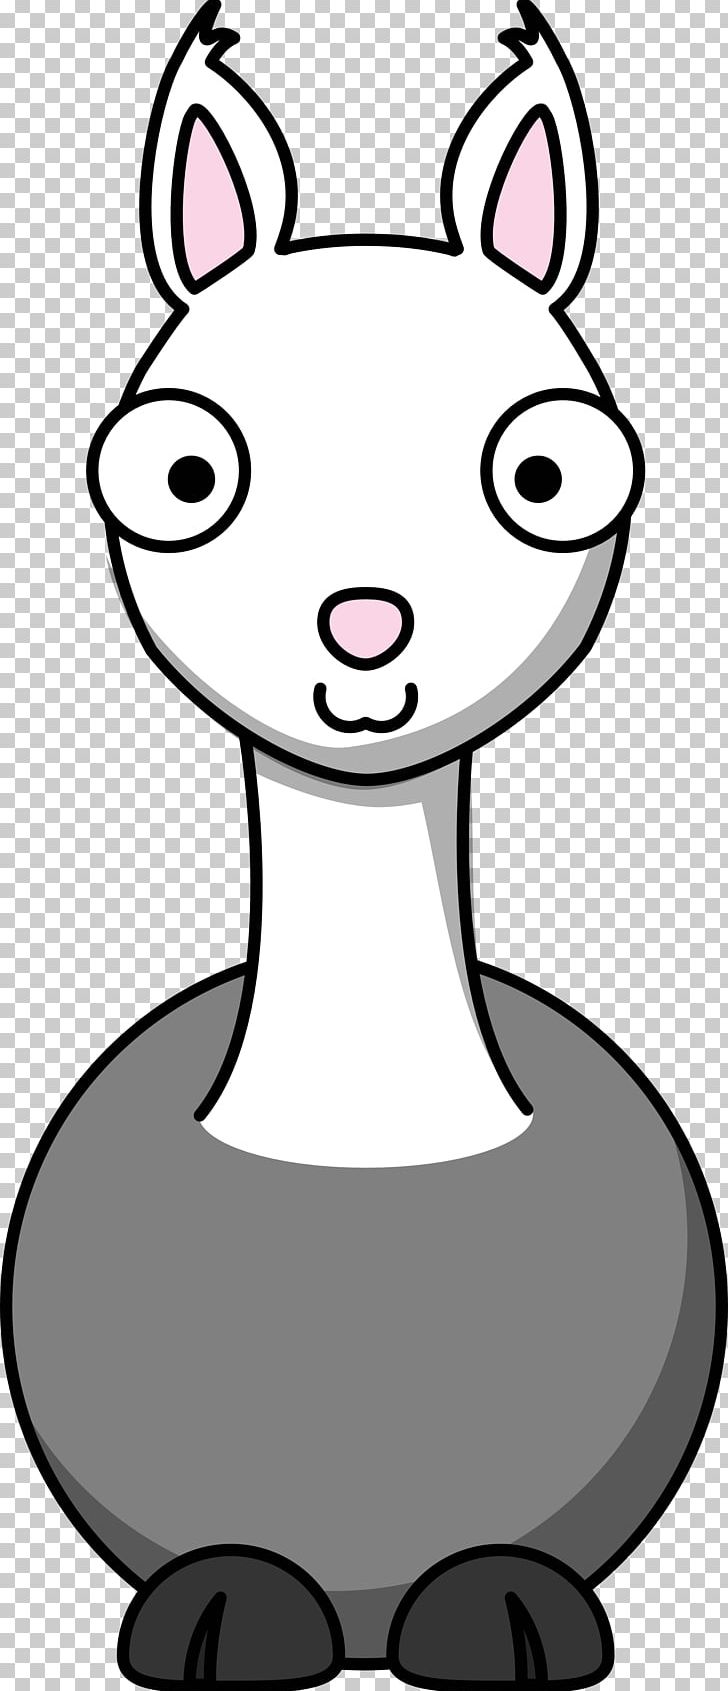 Llama Cartoon Drawing PNG, Clipart, Artwork, Black And White, Caricature, Cartoon, Download Free PNG Download